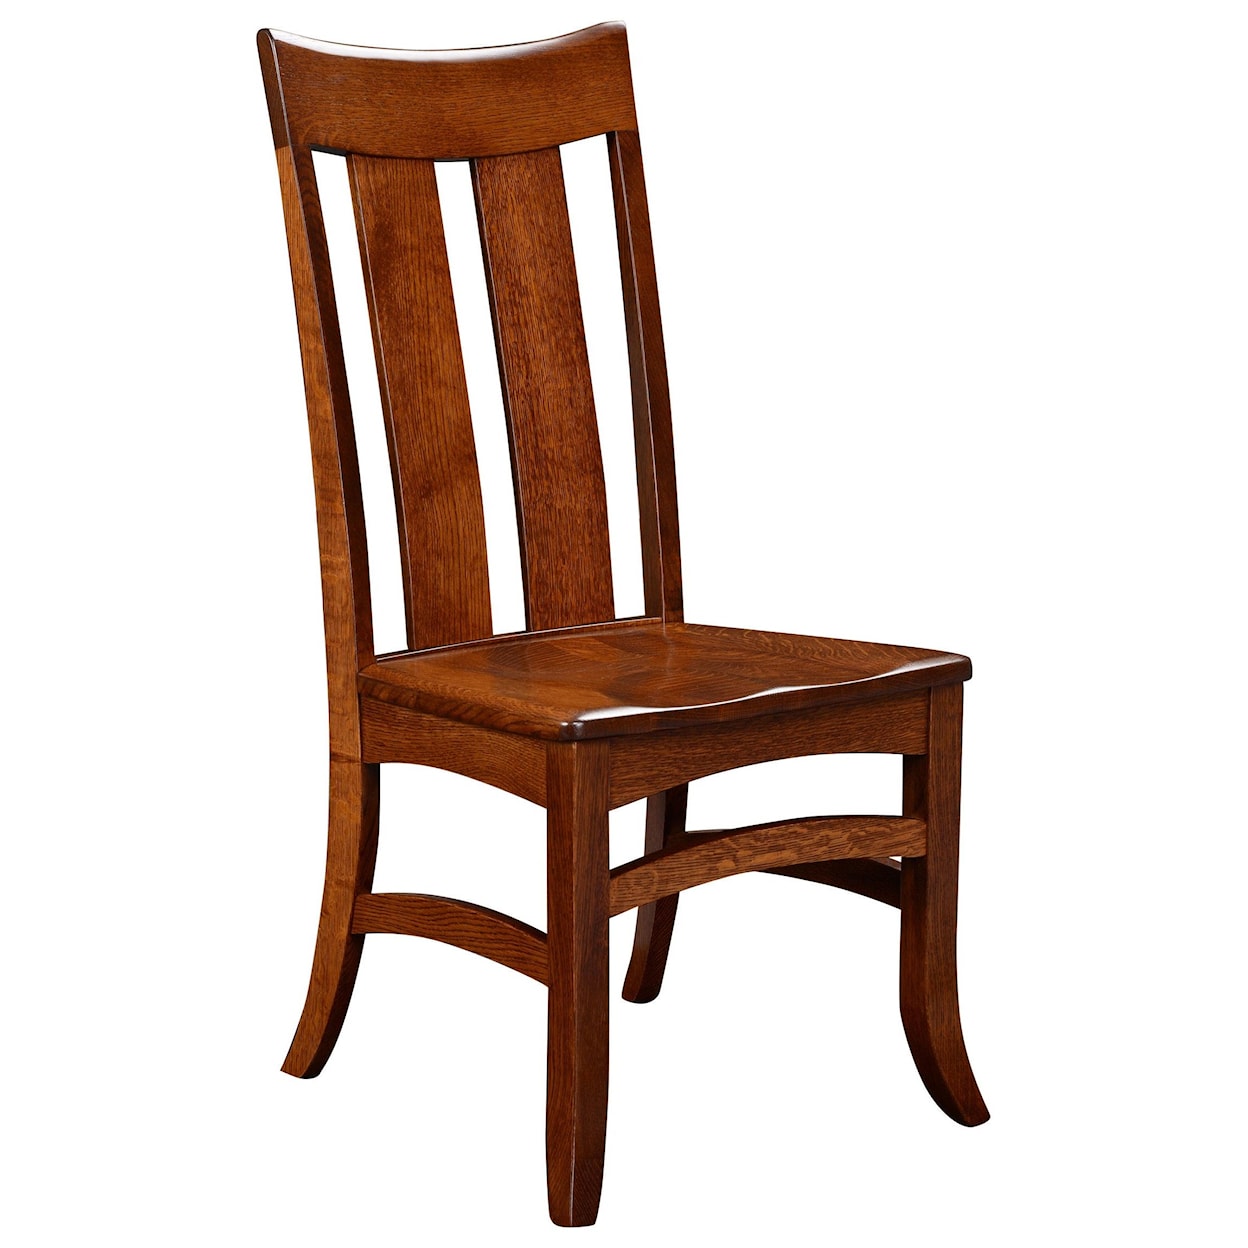 Wengerd Wood Products Galion Side Chair